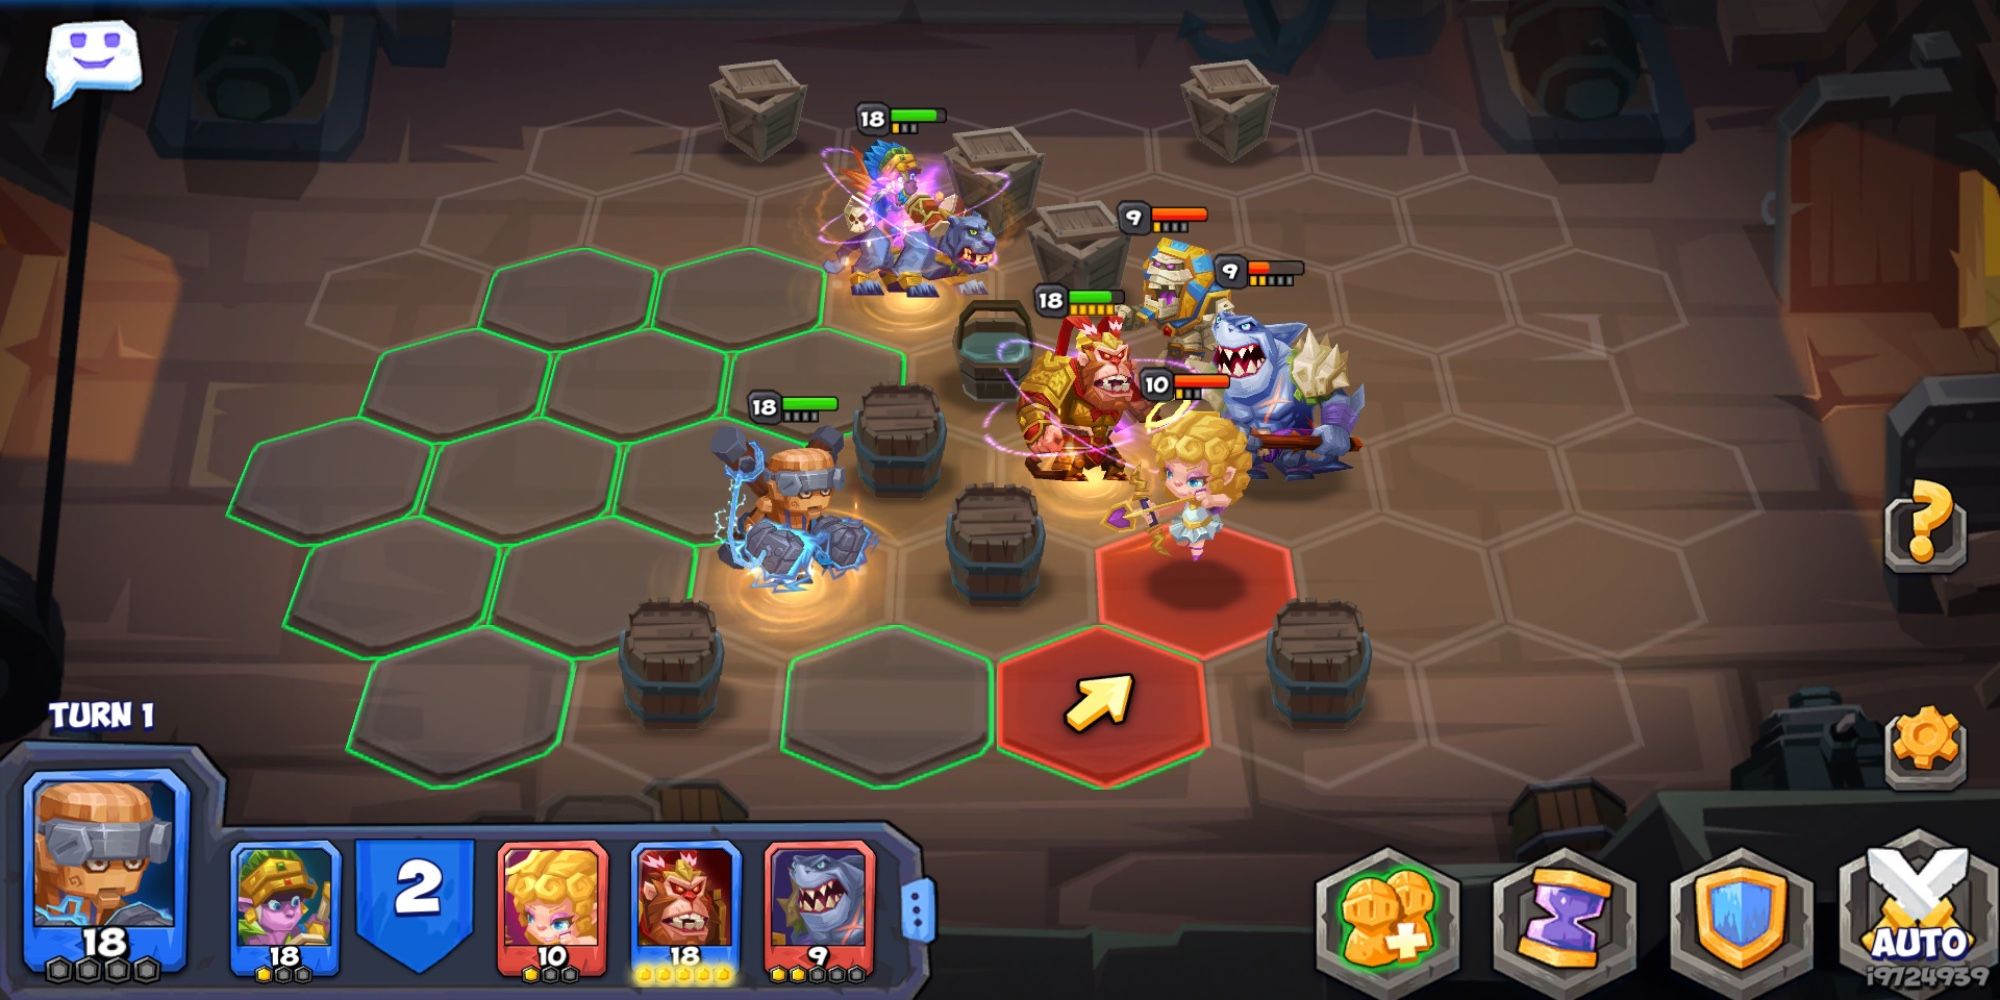 Free-to-play RPGs on Steam - Tactical Monsters Rumble Arena - Cupid, Wukong, and The Mummy in battle